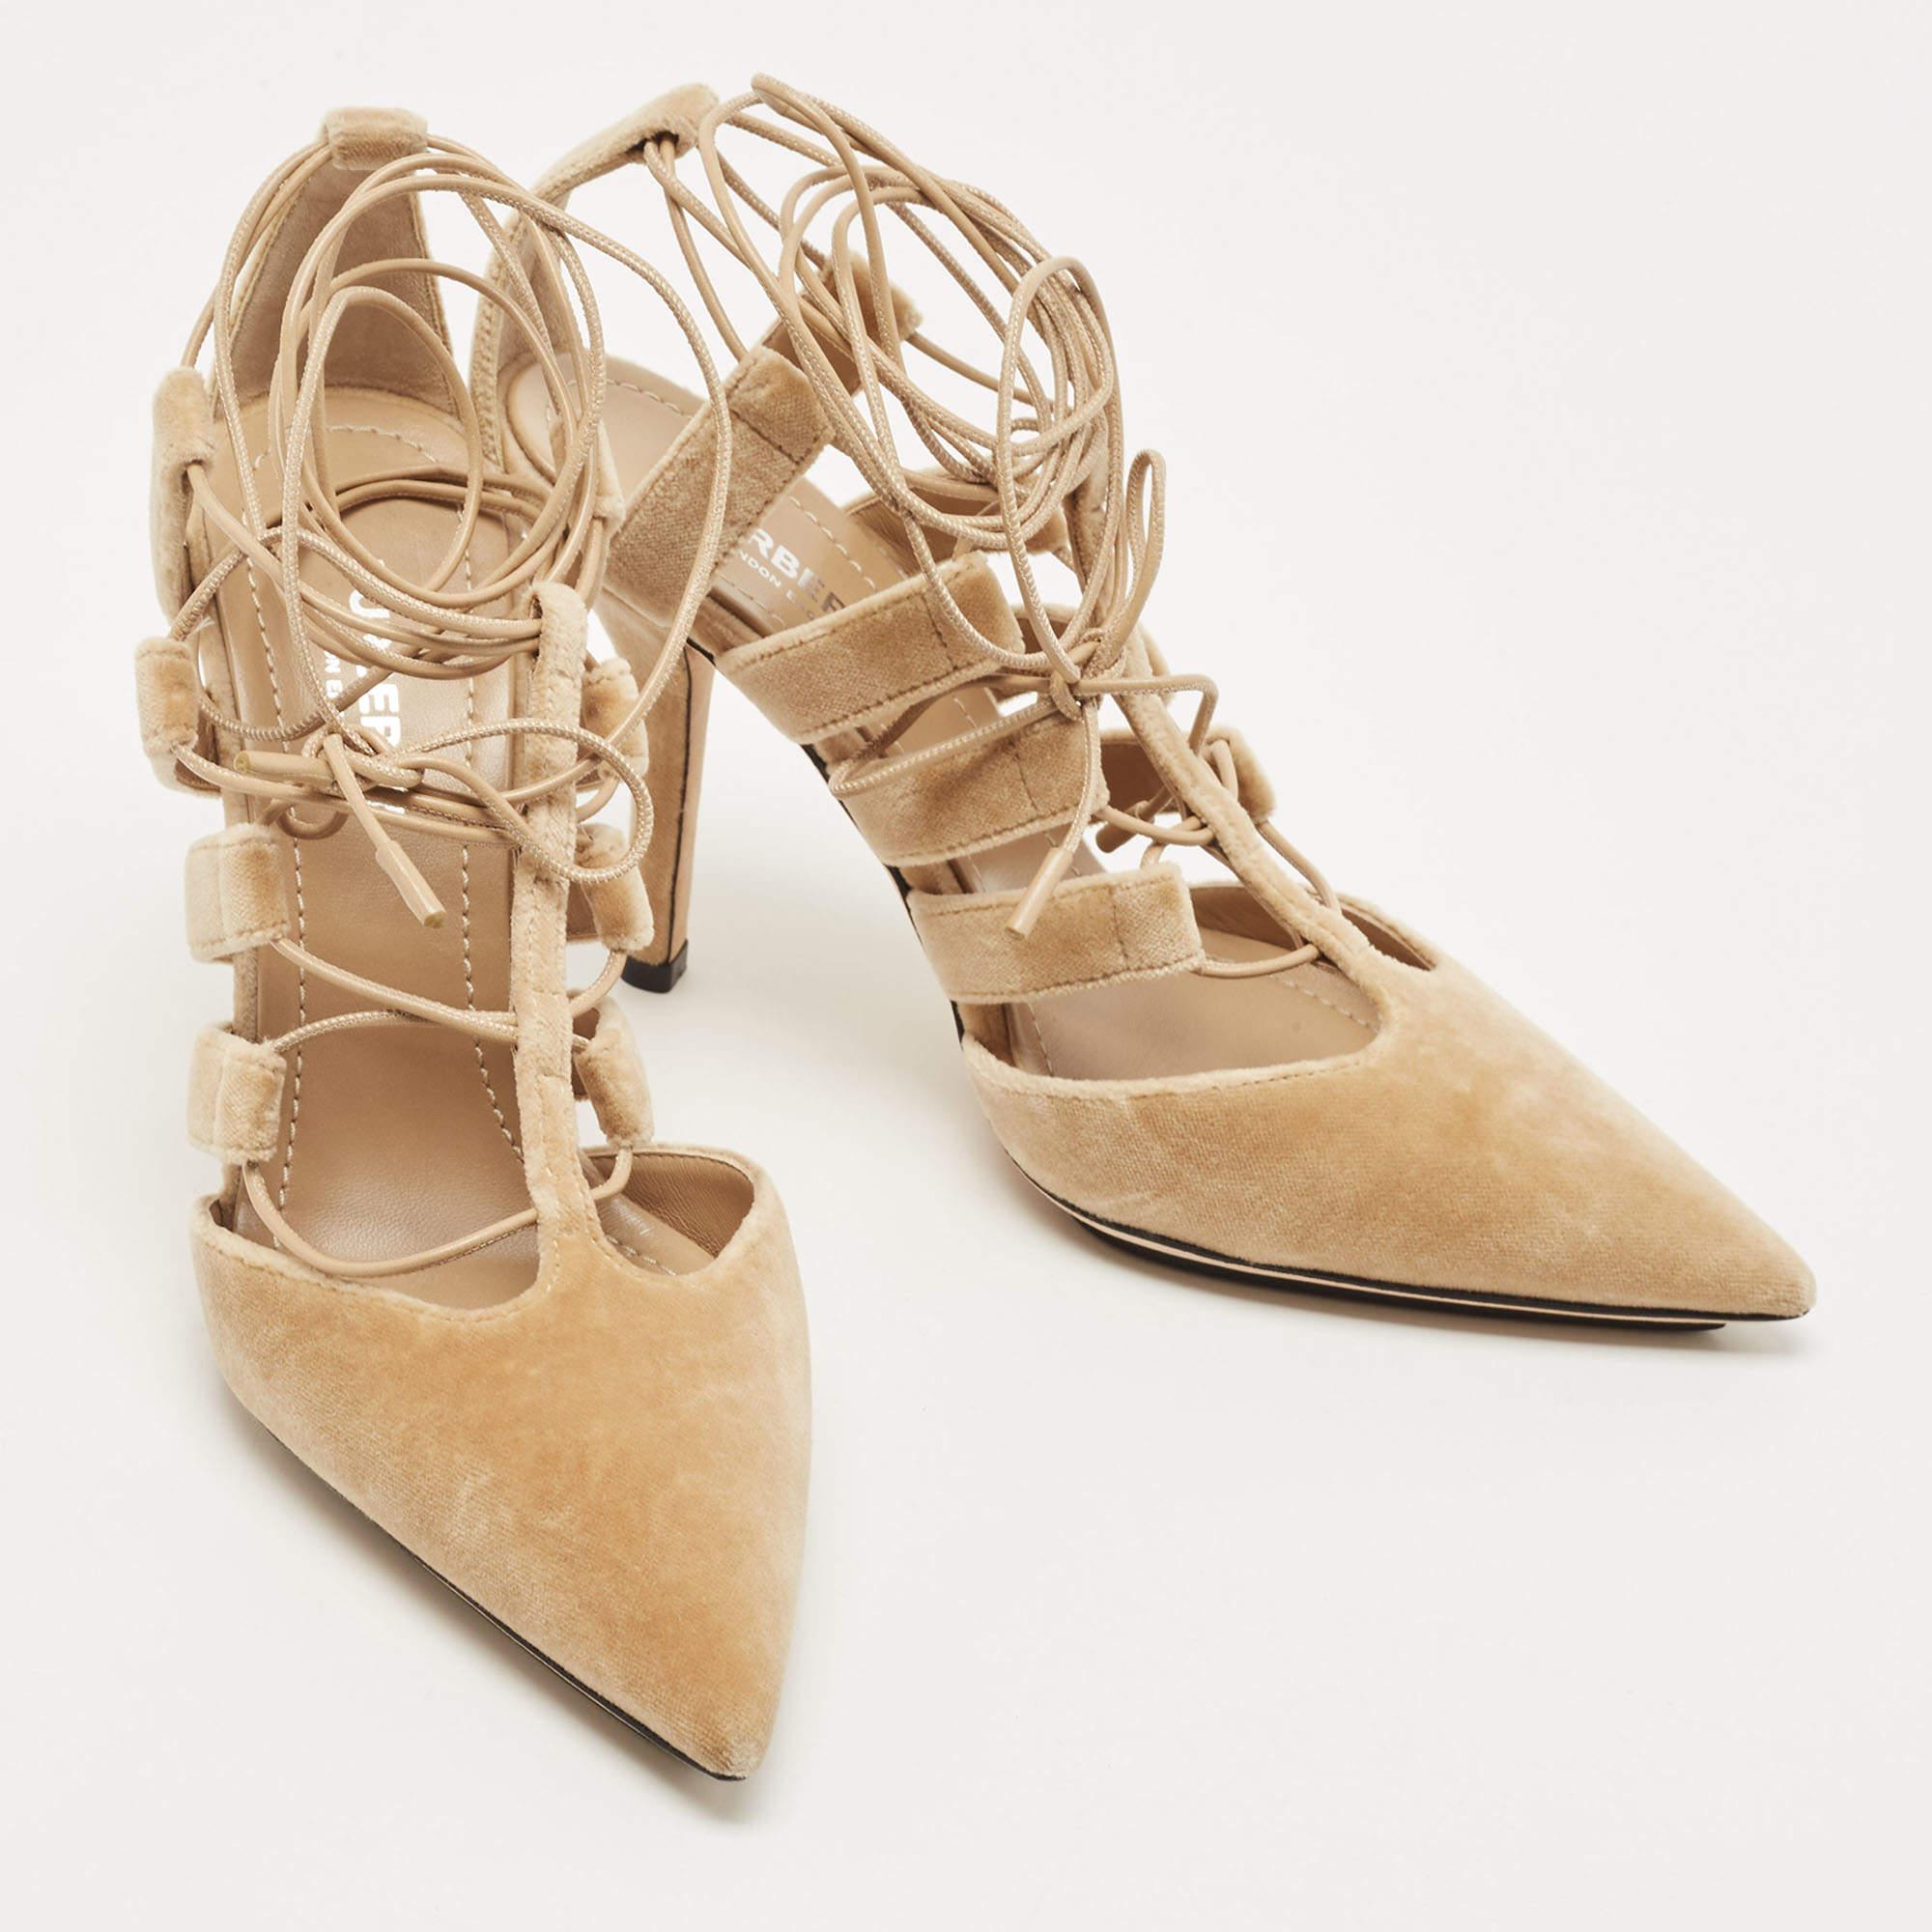 Elevate your style statement with these strappy pumps from Burberry! The pumps are crafted from velvet and added with pointed toes, tonal strings for an ankle tie design, and high heels.

